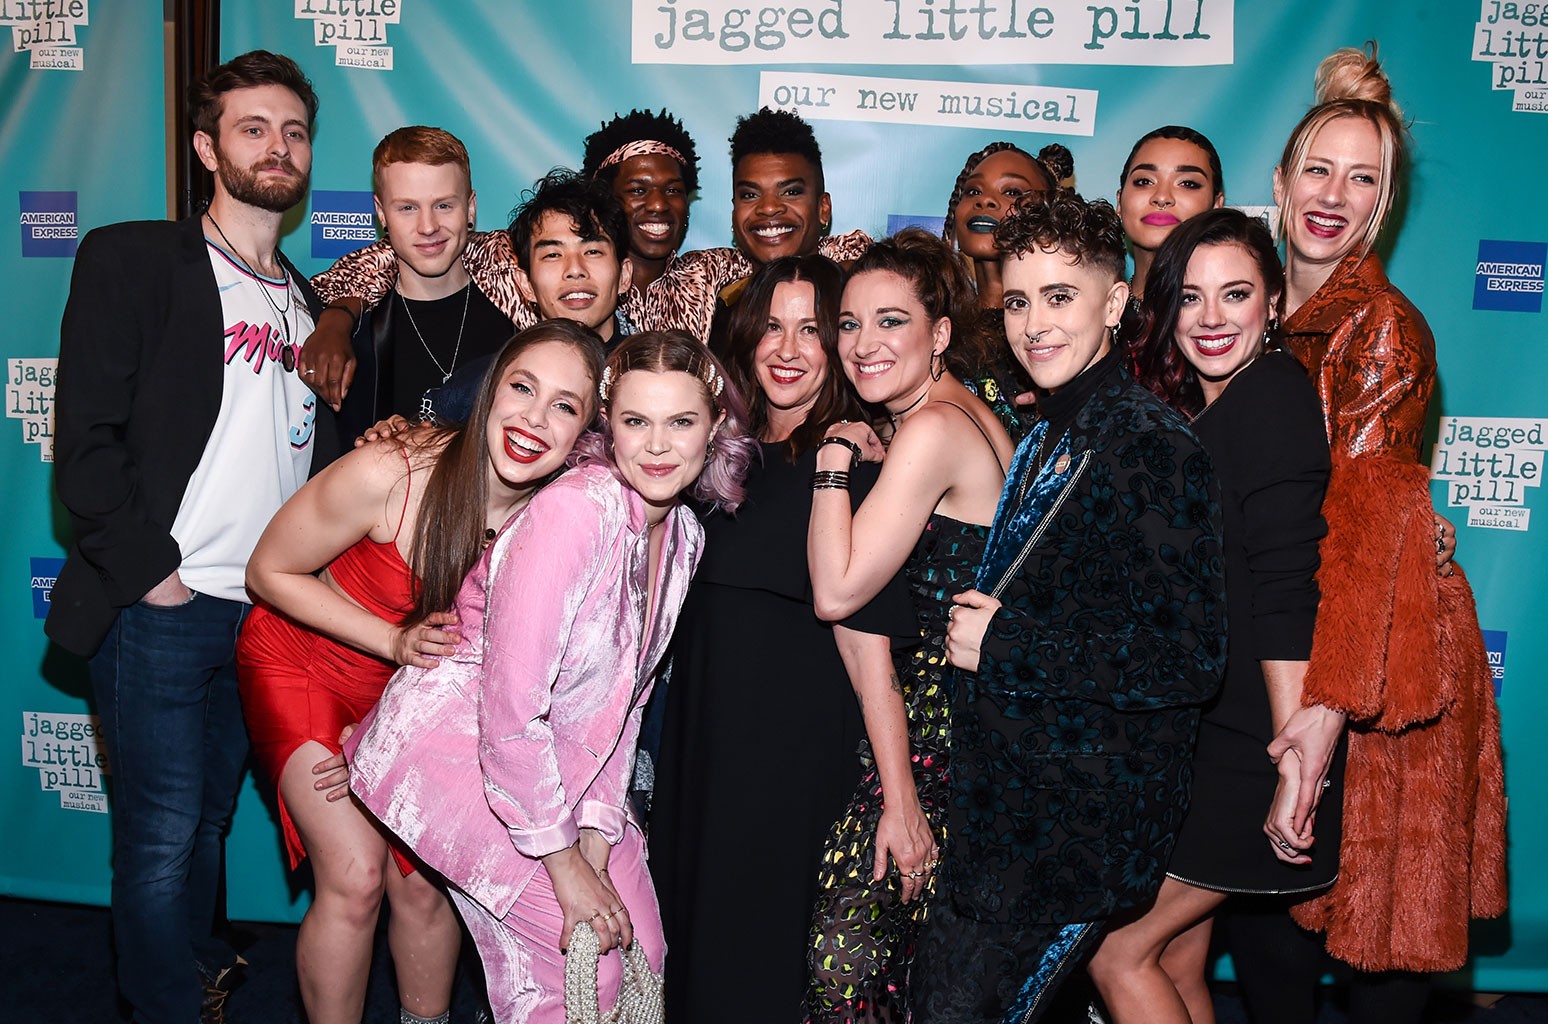 Just Days Before Tony Awards 2021 'Jagged Little Pill' Hit by Misconduct Allegations